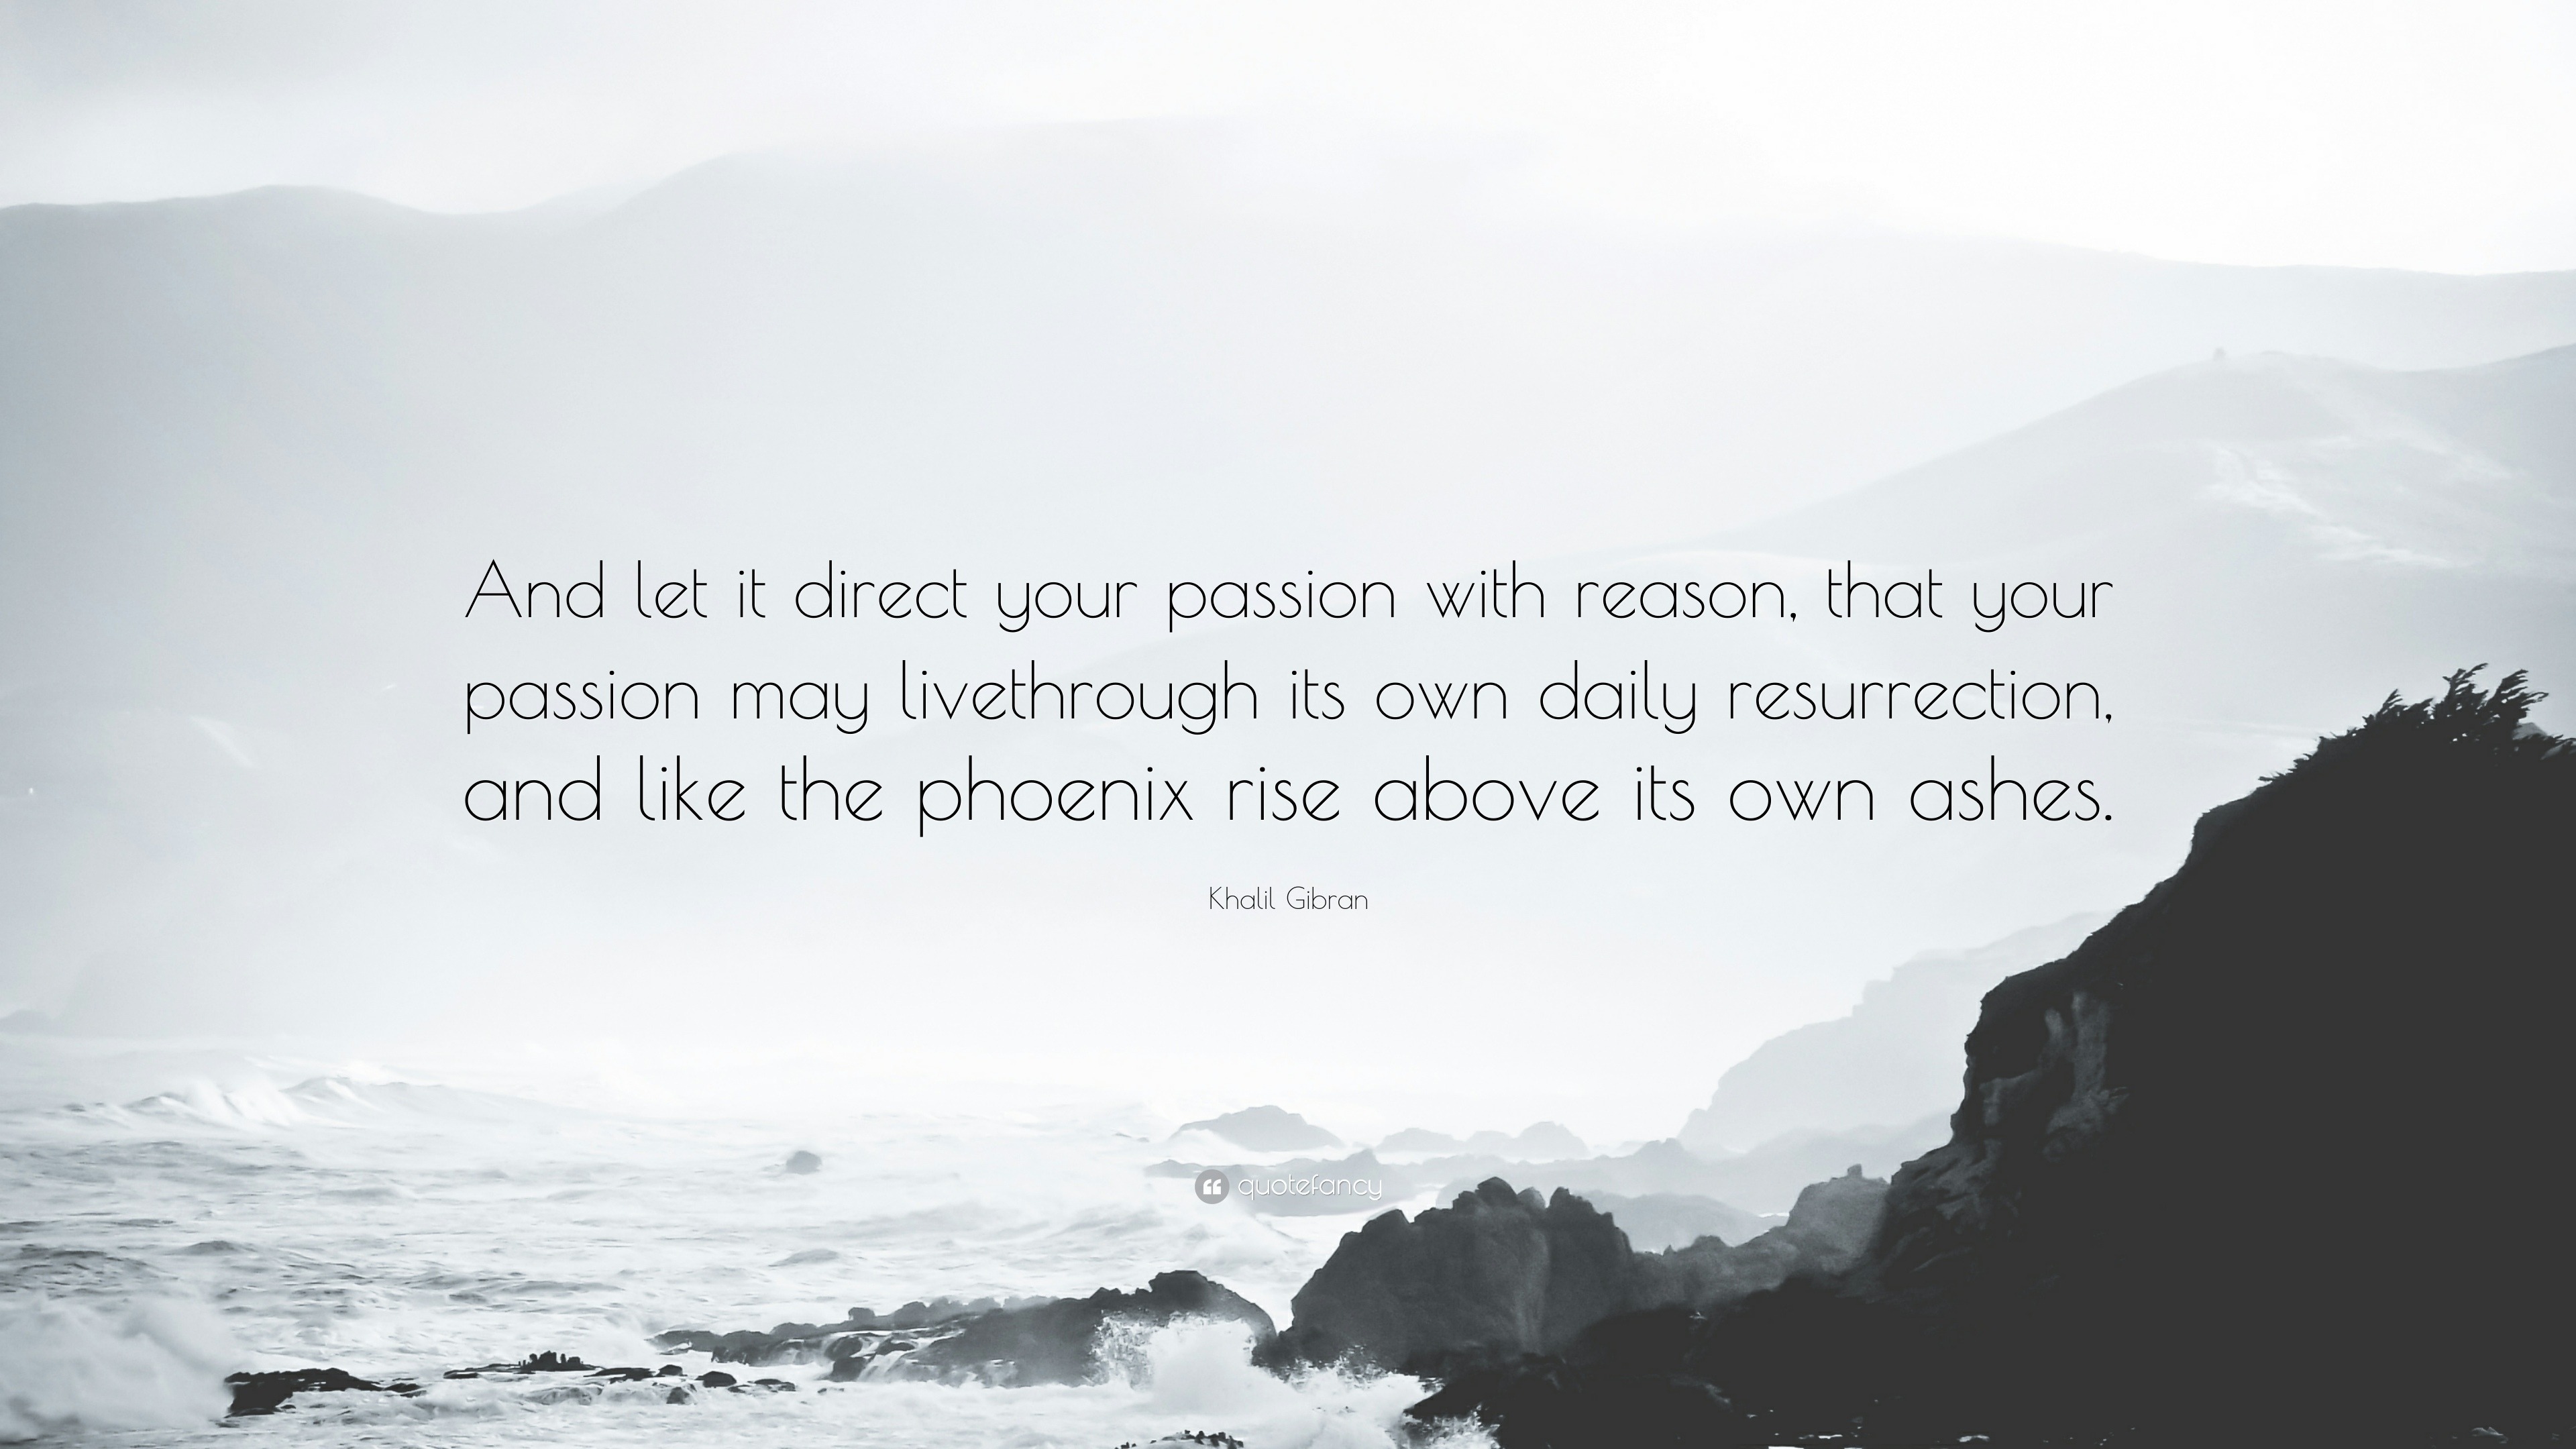 Khalil Gibran Quote And Let It Direct Your Passion With Reason That Your Passion May Livethrough Its Own Daily Resurrection And Like The P